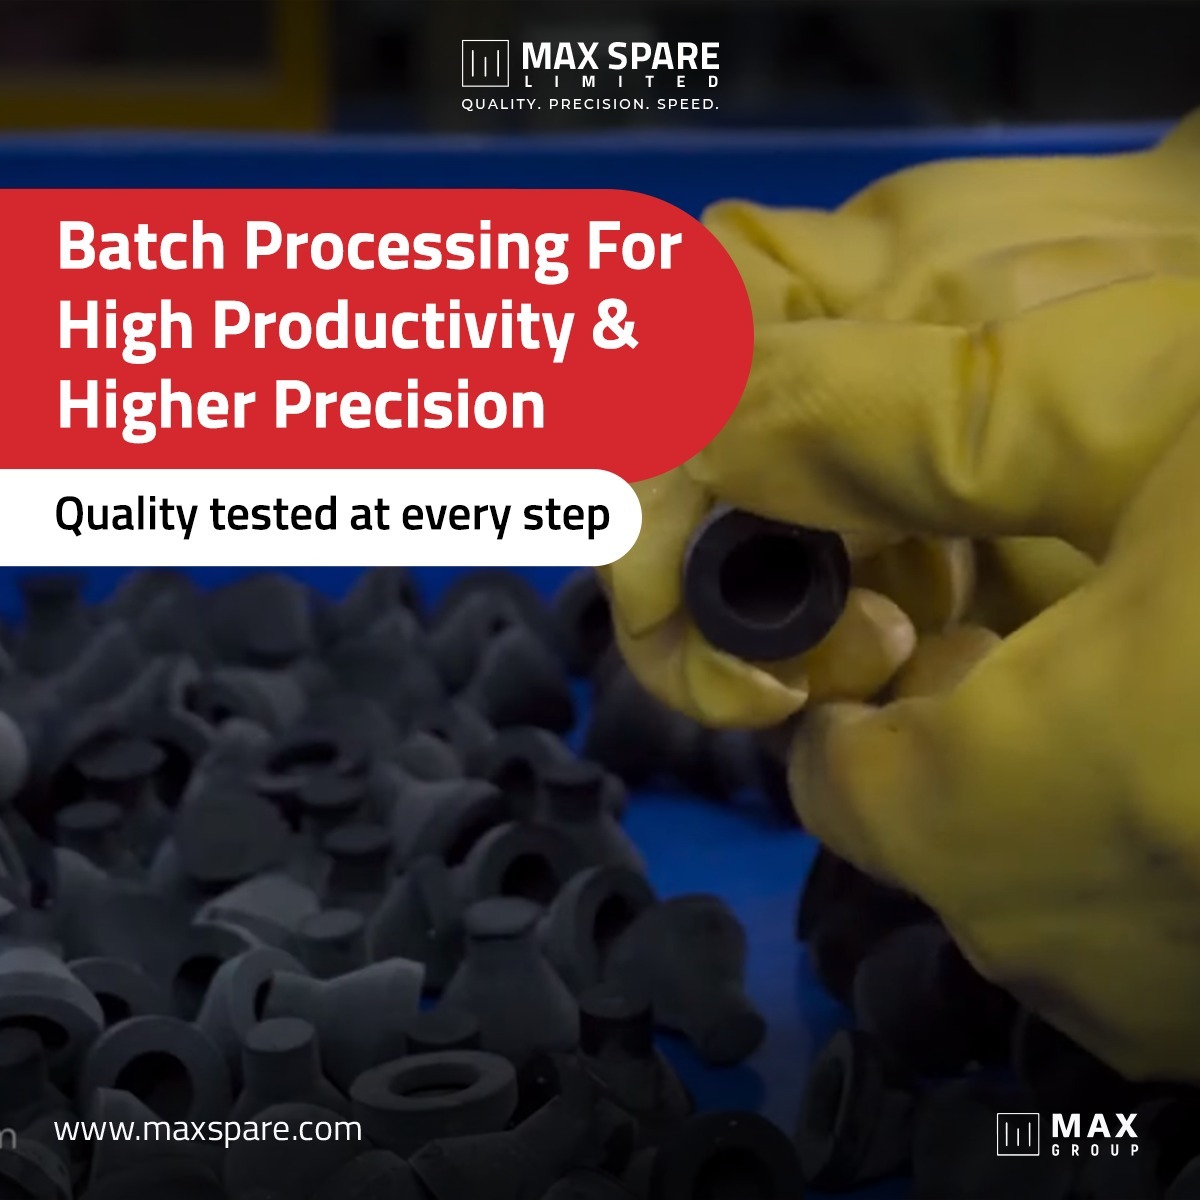 Max Spare sets the bar high with unrivaled quality assurance! We do meticulous batch processing to deliver maximum productivity and the highest precision in our products.

#sealmanufacturing #lubrication #sealthedeal #highprecision #batchprocessing